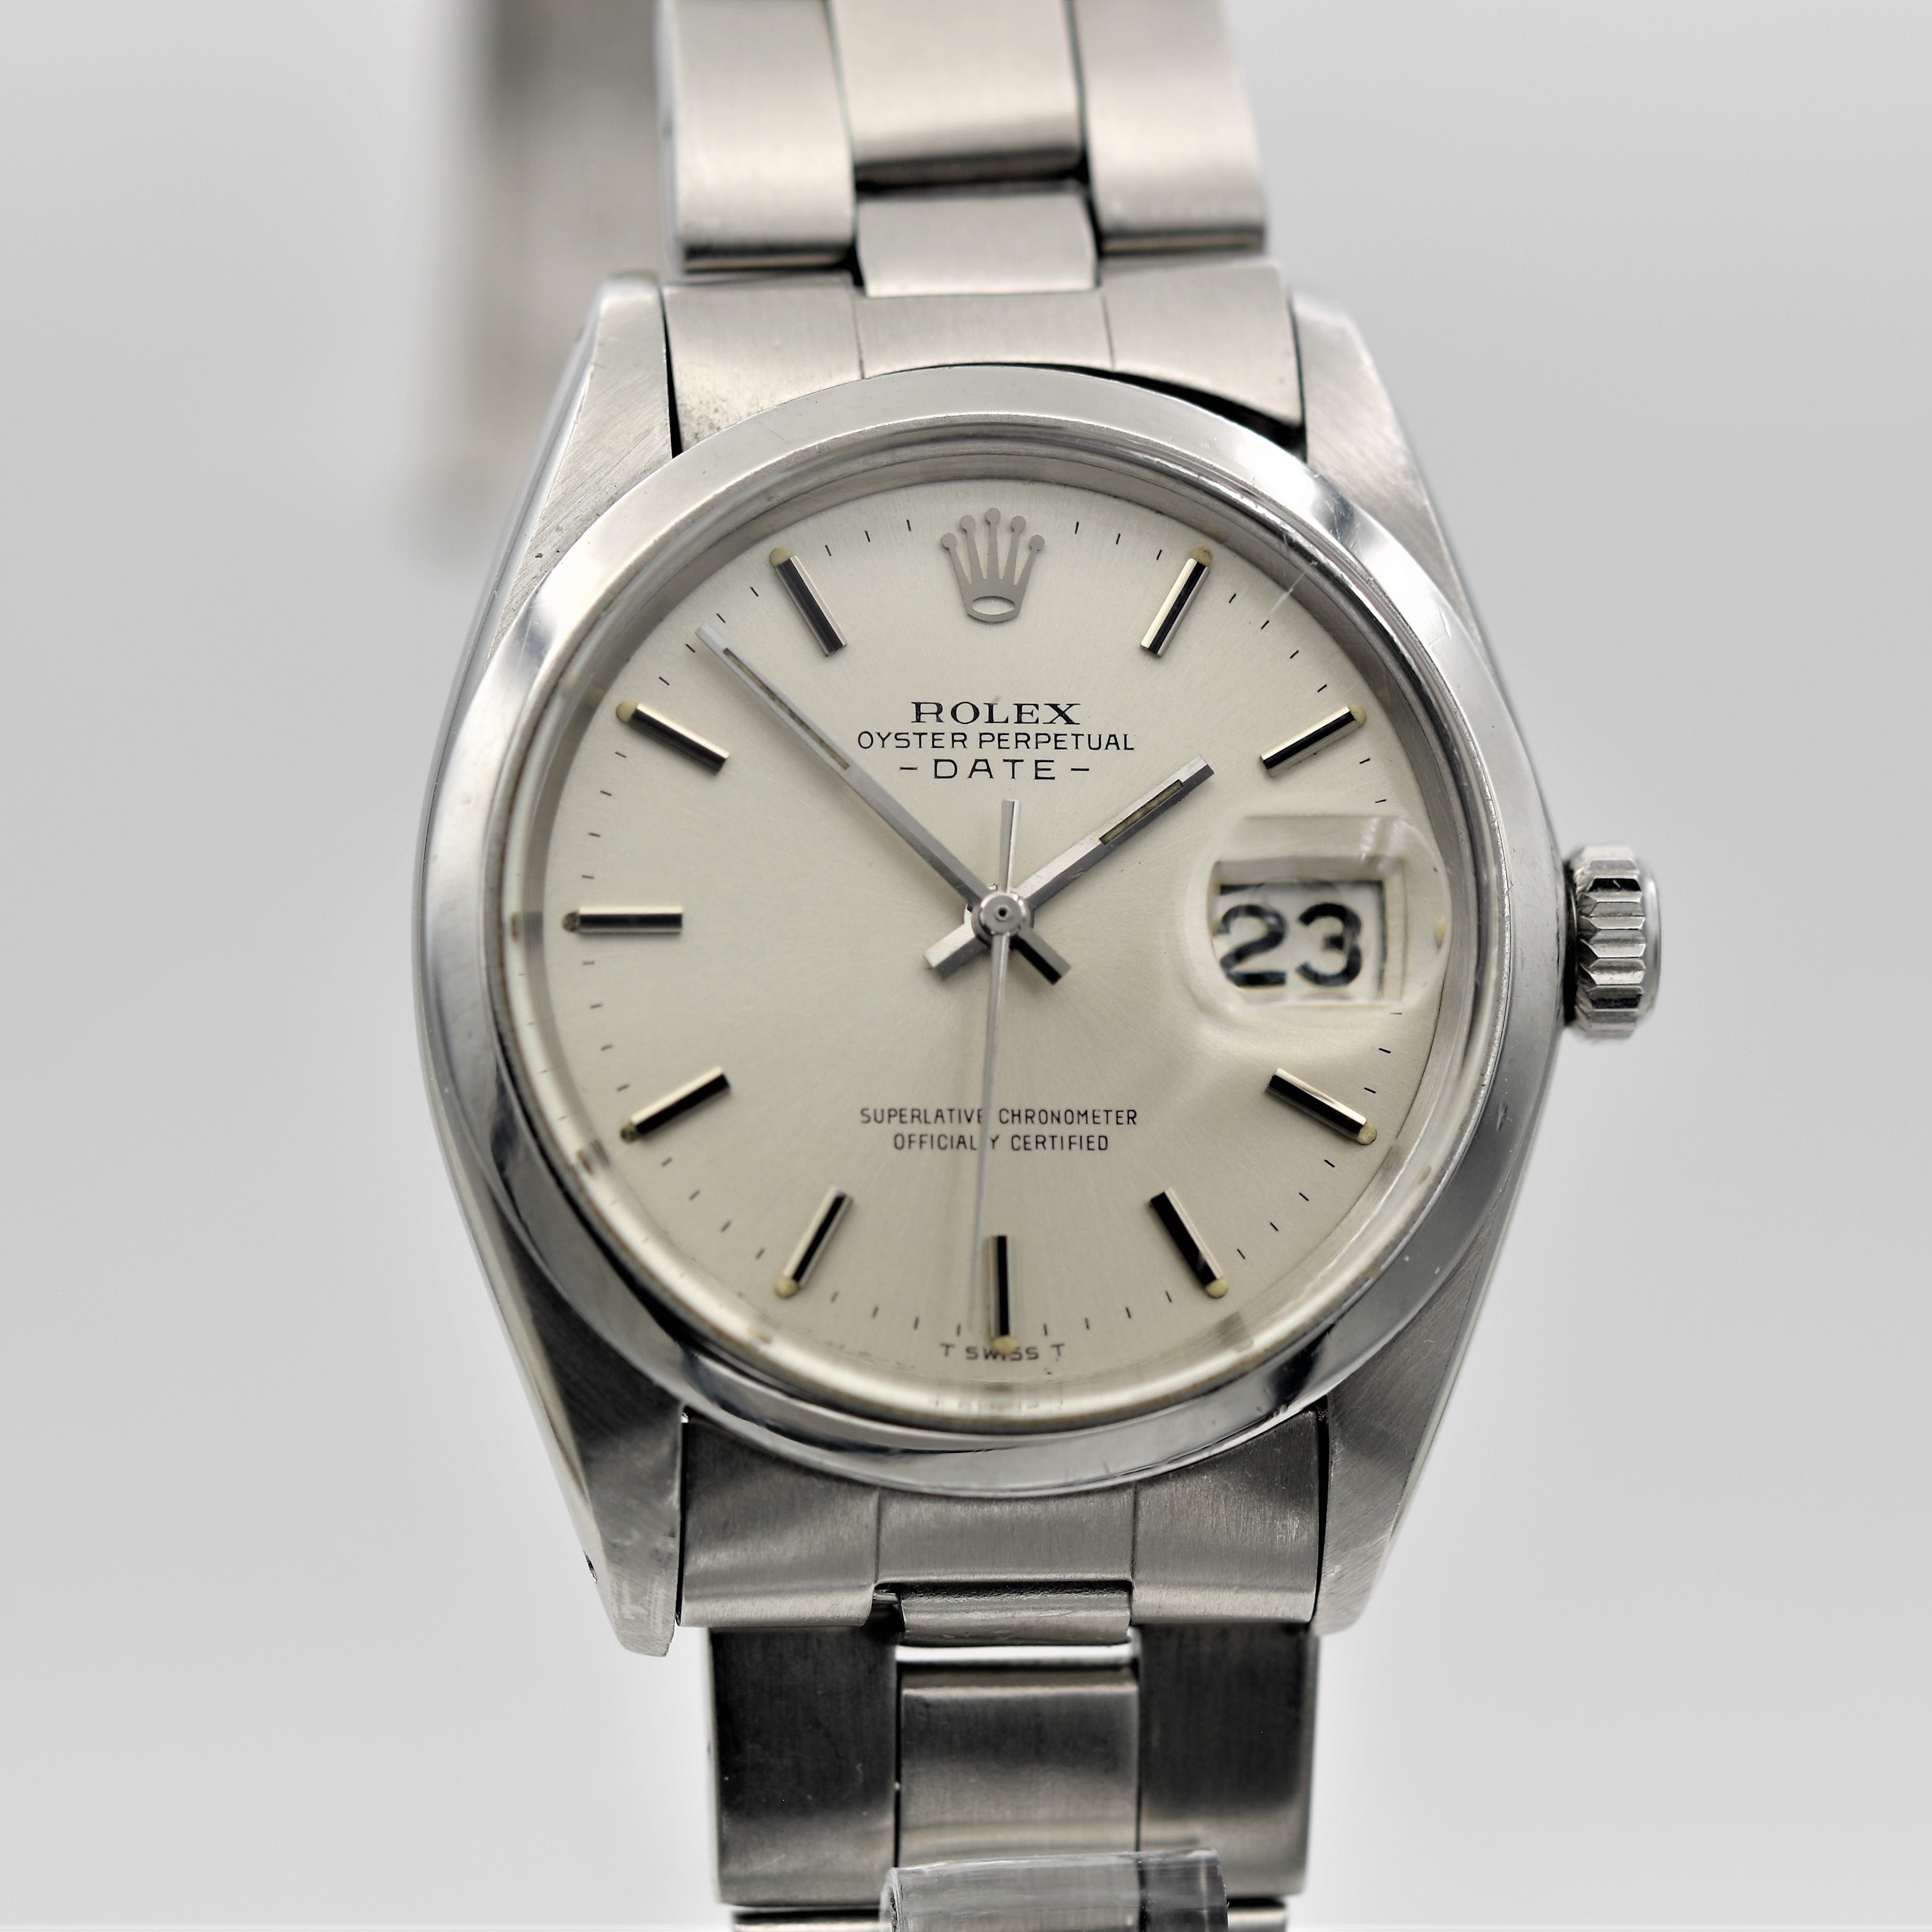 ROLEX Perpetual - Vintage Watches